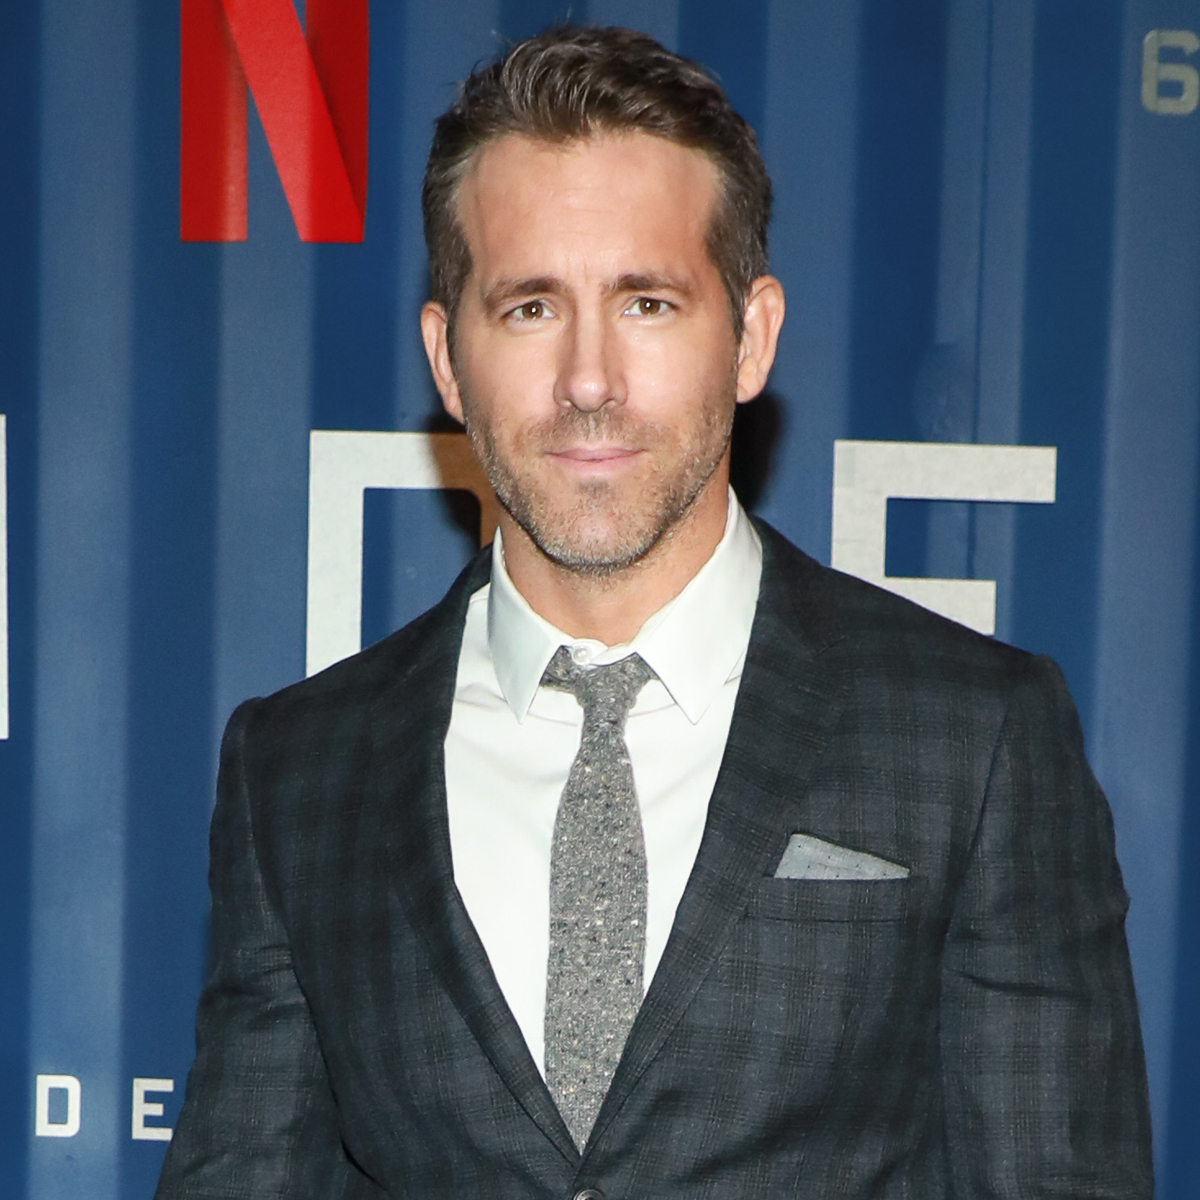 Ryan Reynolds opens up about anxiety